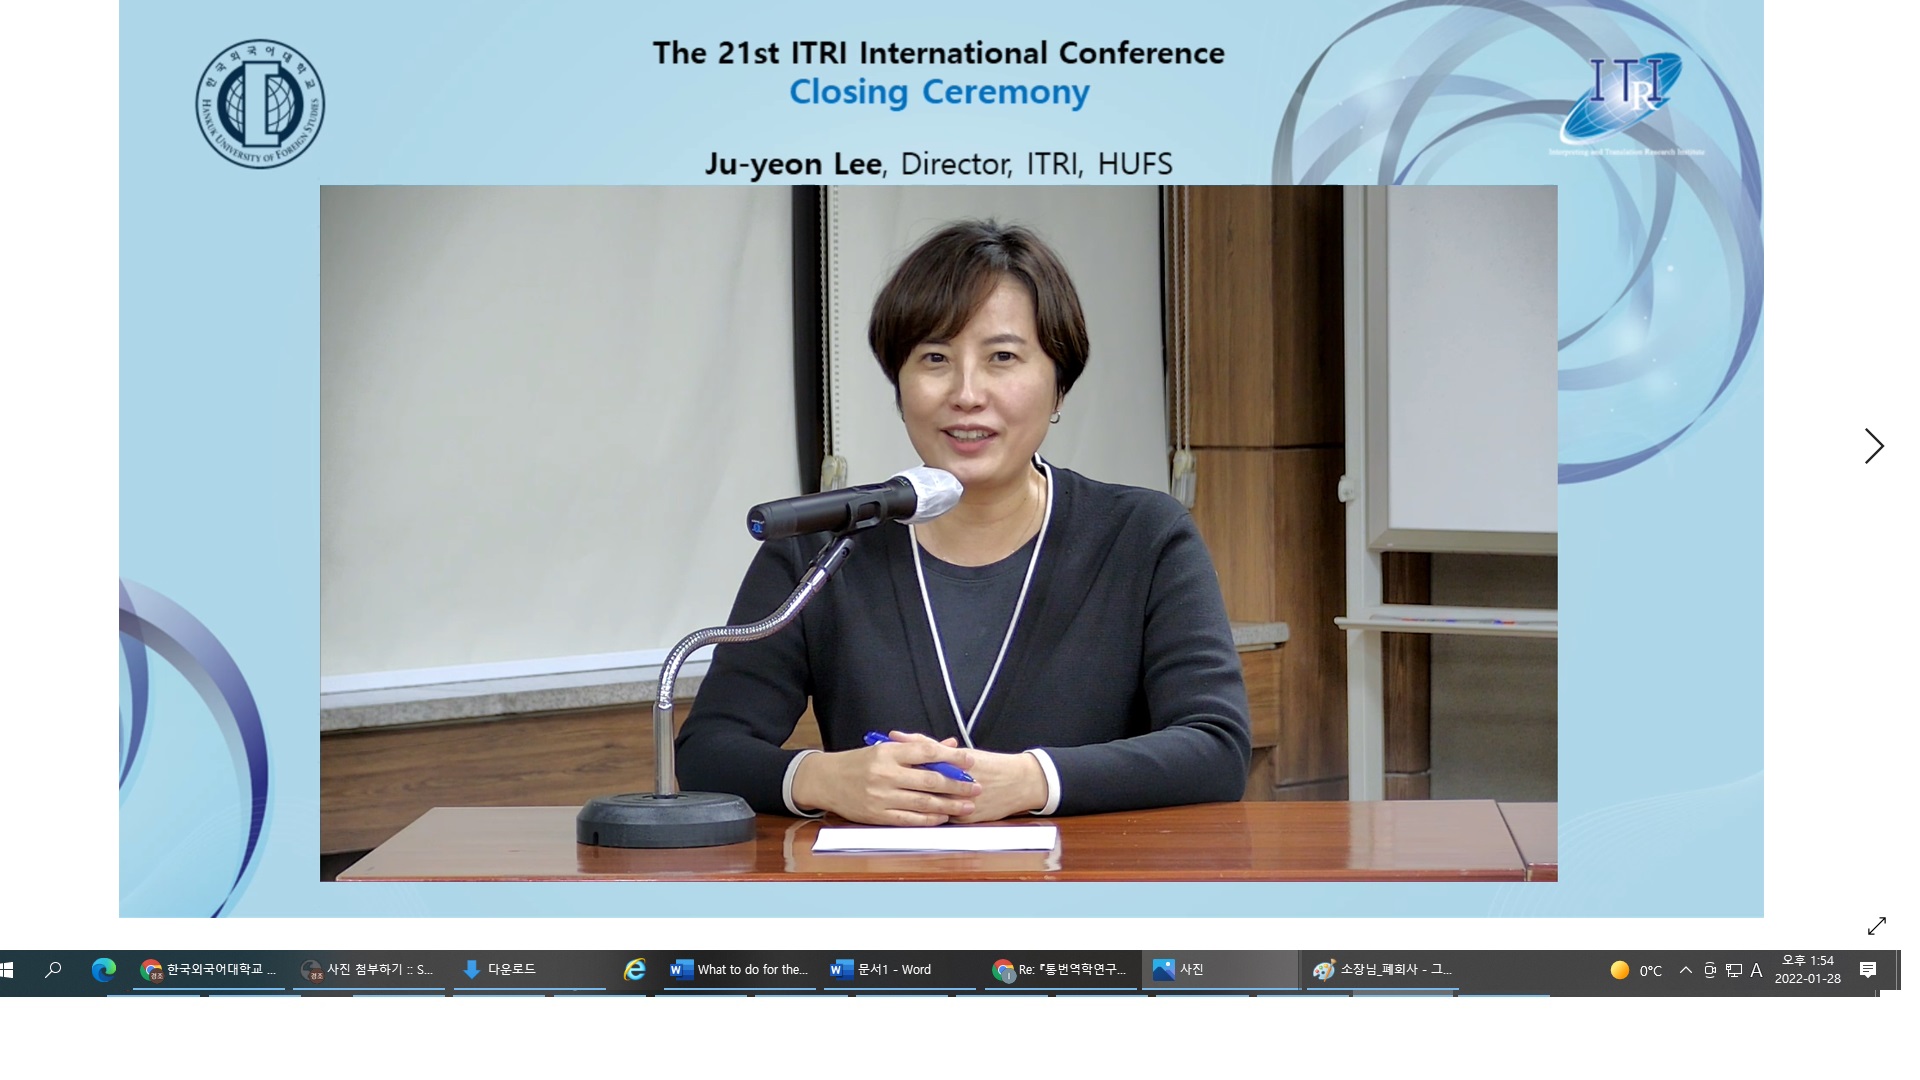 The 21st ITRI International Conference